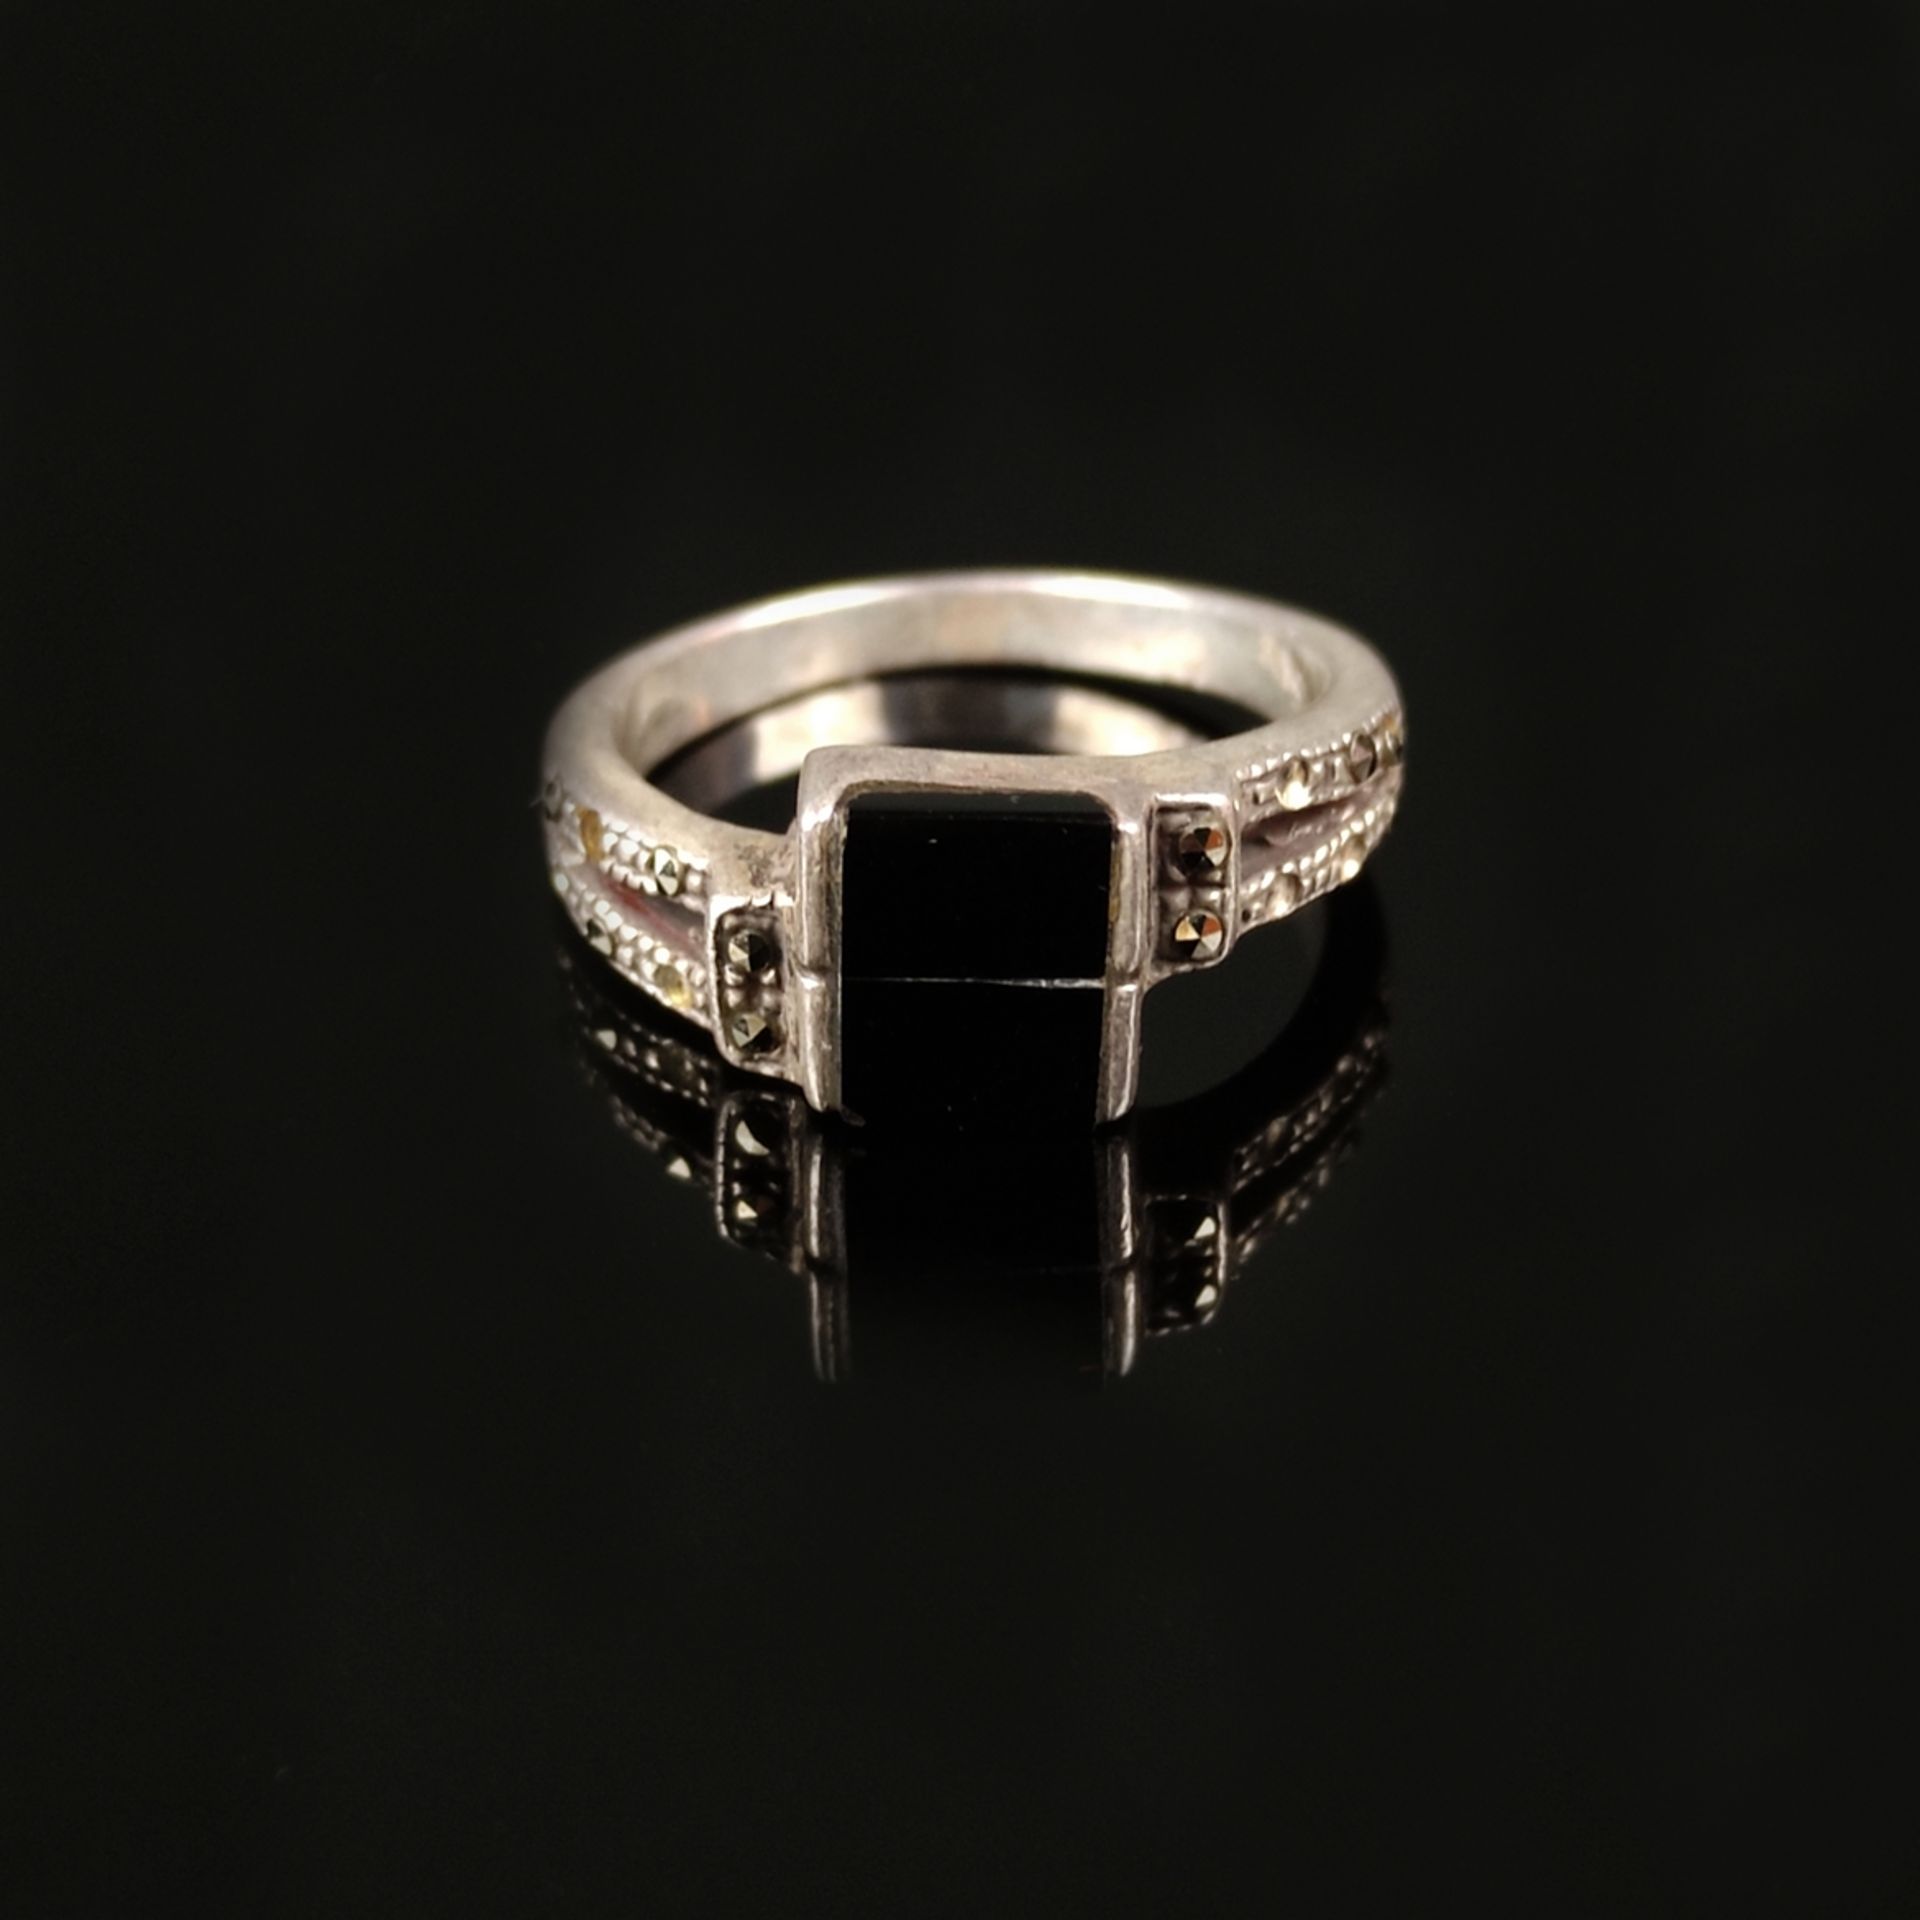 Antique onyx ring, silver 925 (hallmarked), 3.4g, ring set with finely polished rectangular black o - Image 2 of 3